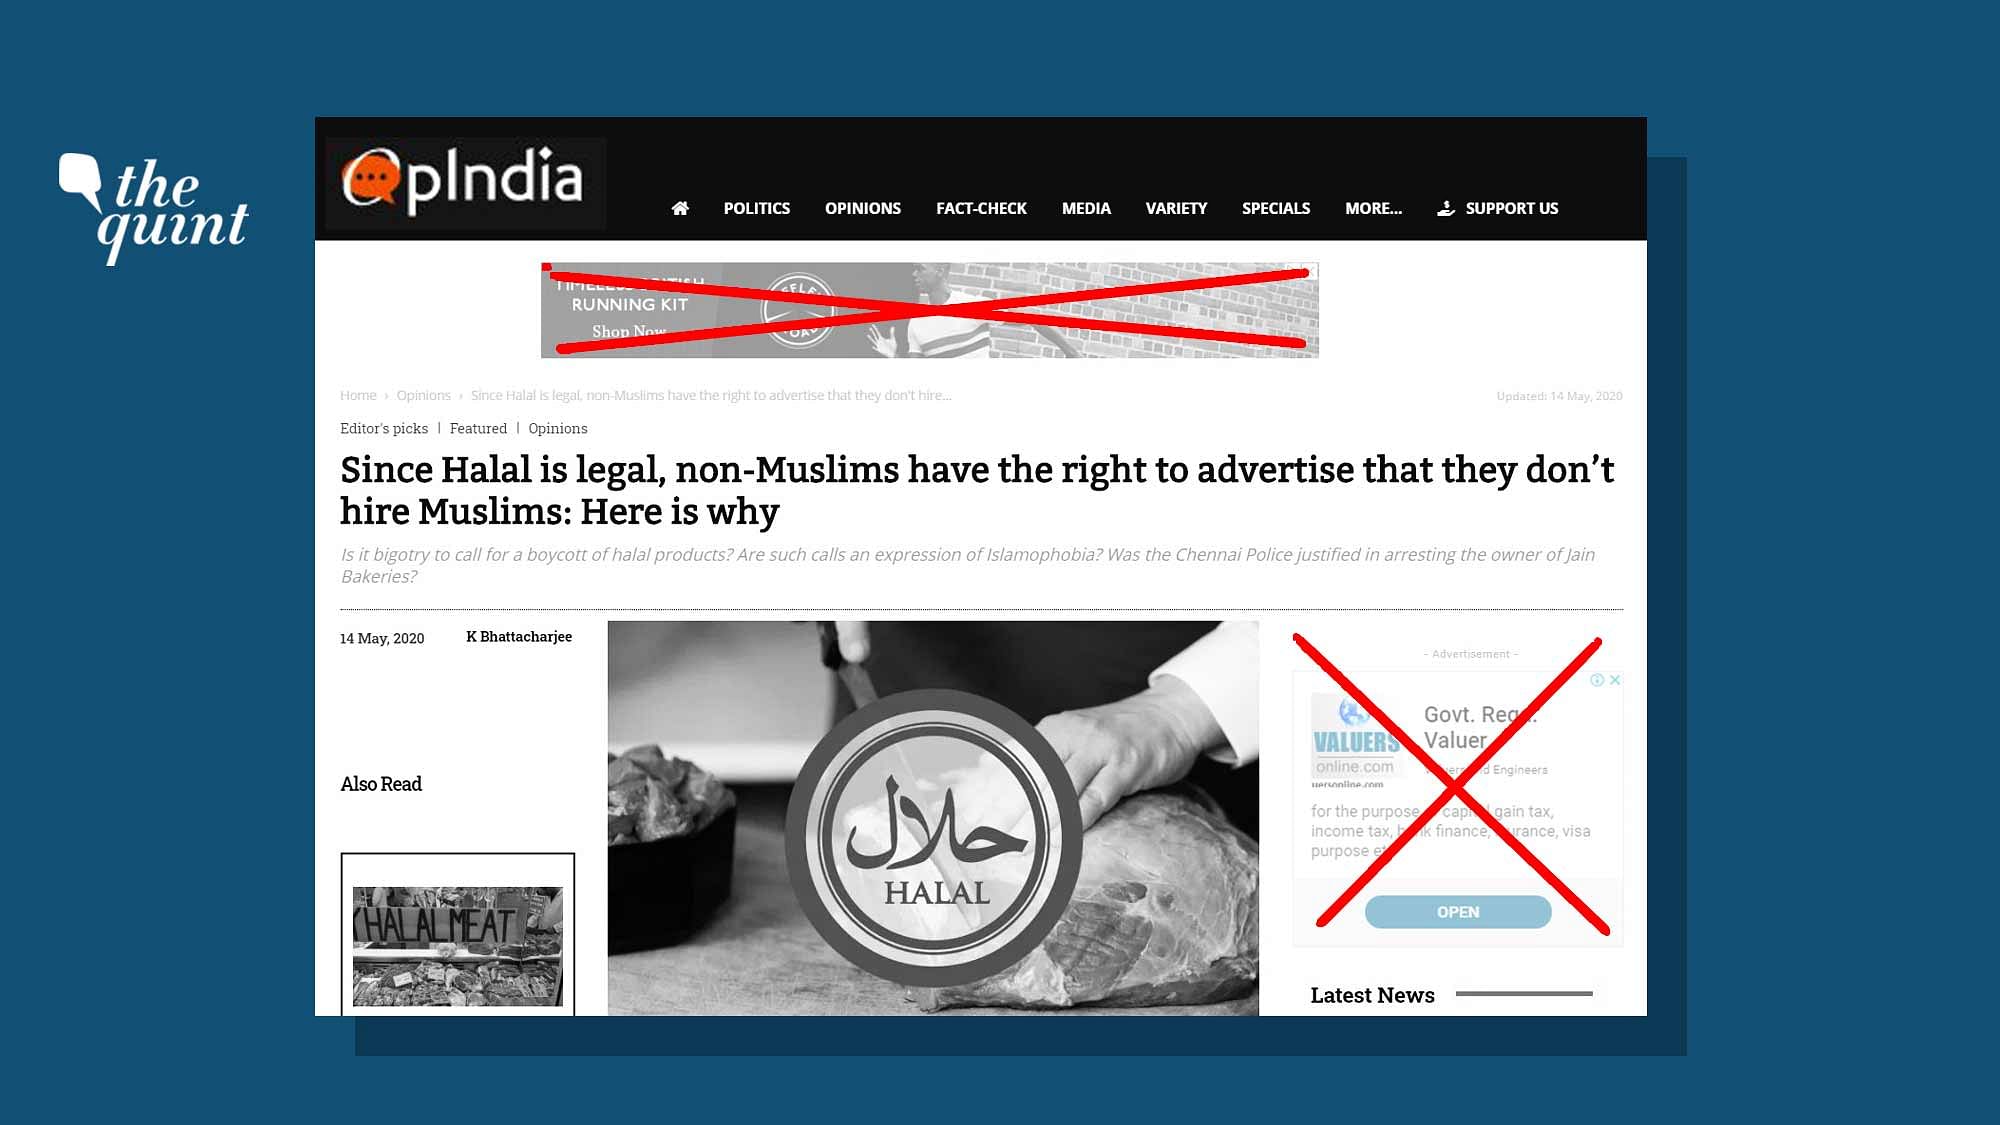 In case of OpIndia, two advertisers – Kiddylicious and LiveWorx – have said that they are pulling down their ads.